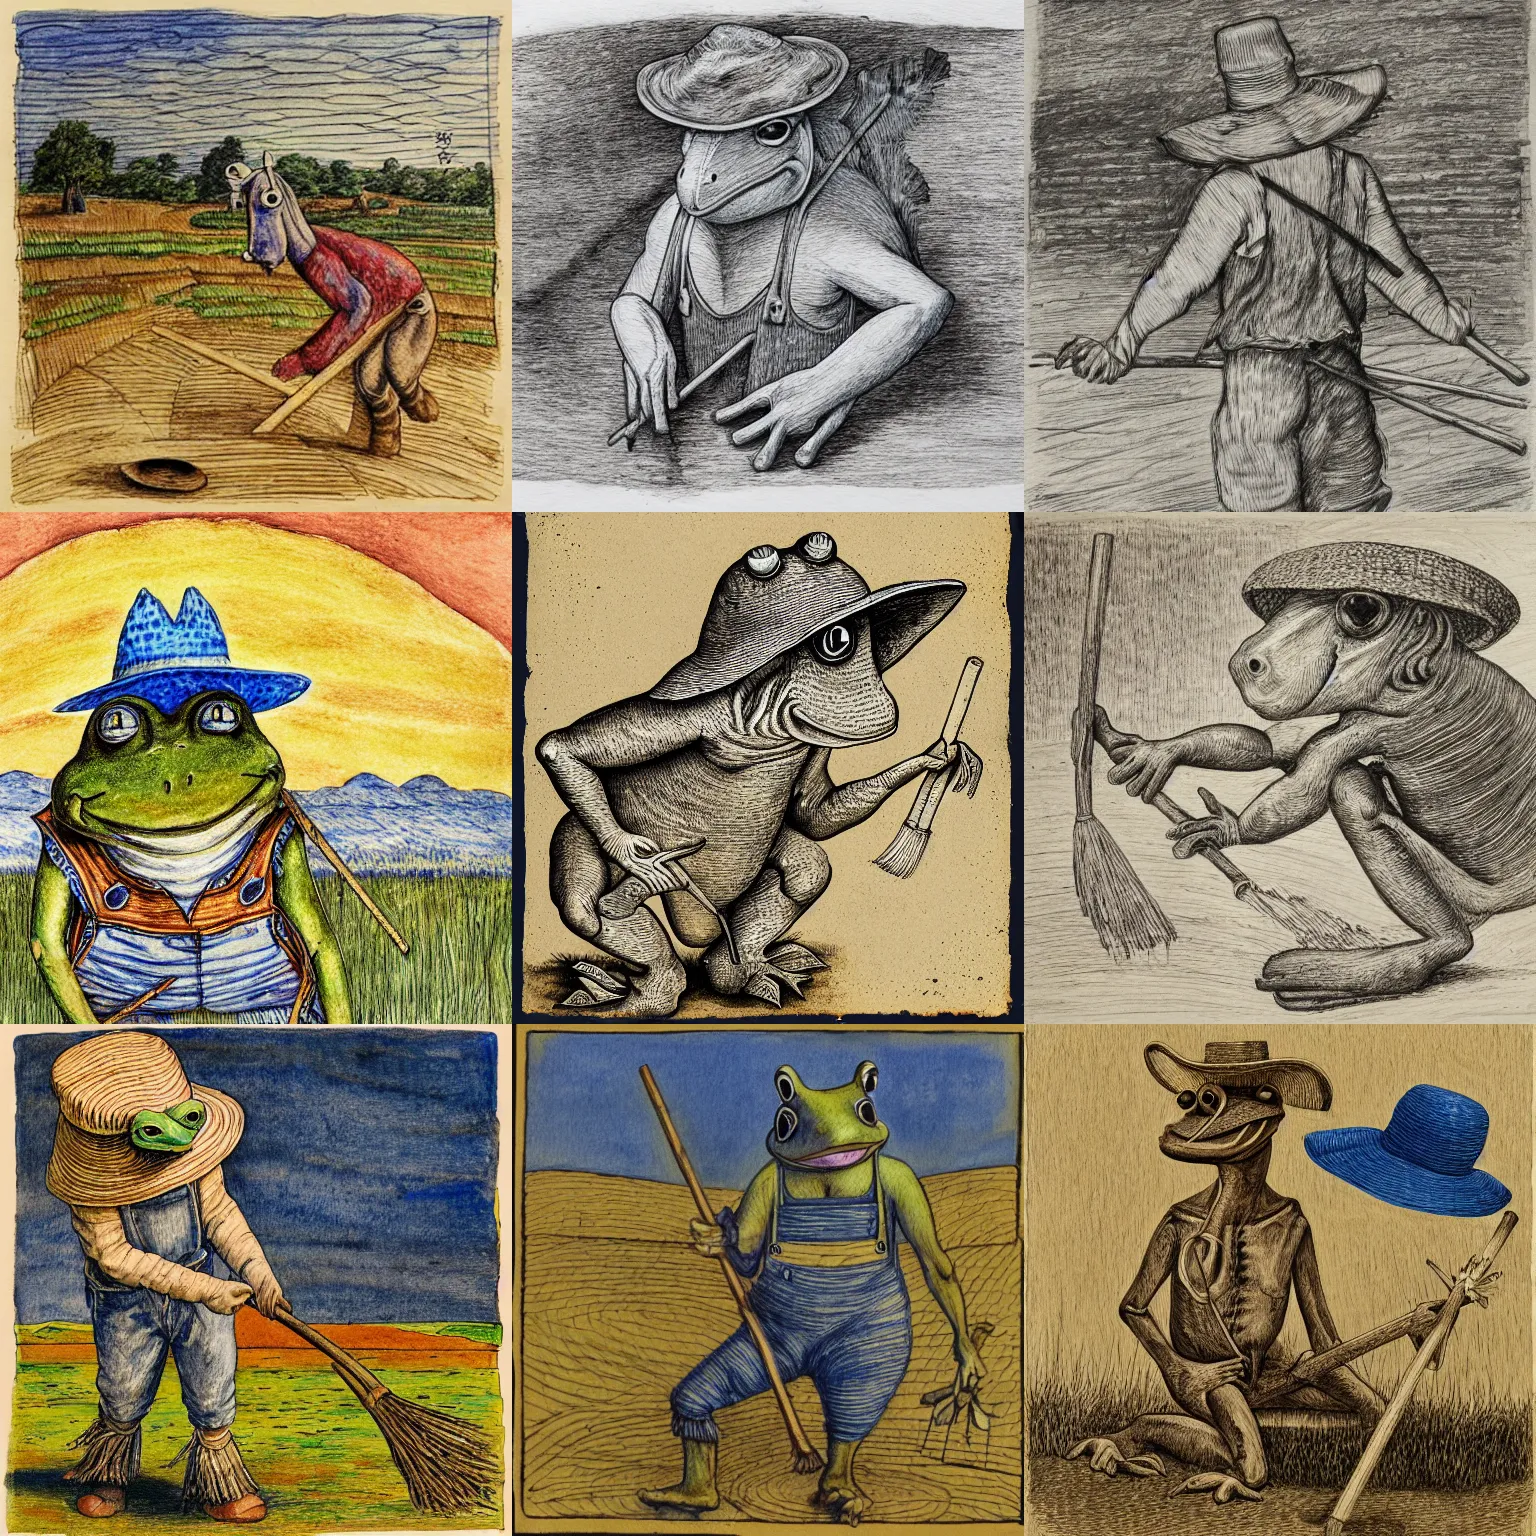 Prompt: horse - headed humanoid frog creature, wearing a straw hat and overalls, using a spade, golden hour, bucolic, expressive linework, crosshatching, grisaille, cobalt blue and ochre watercolor wash